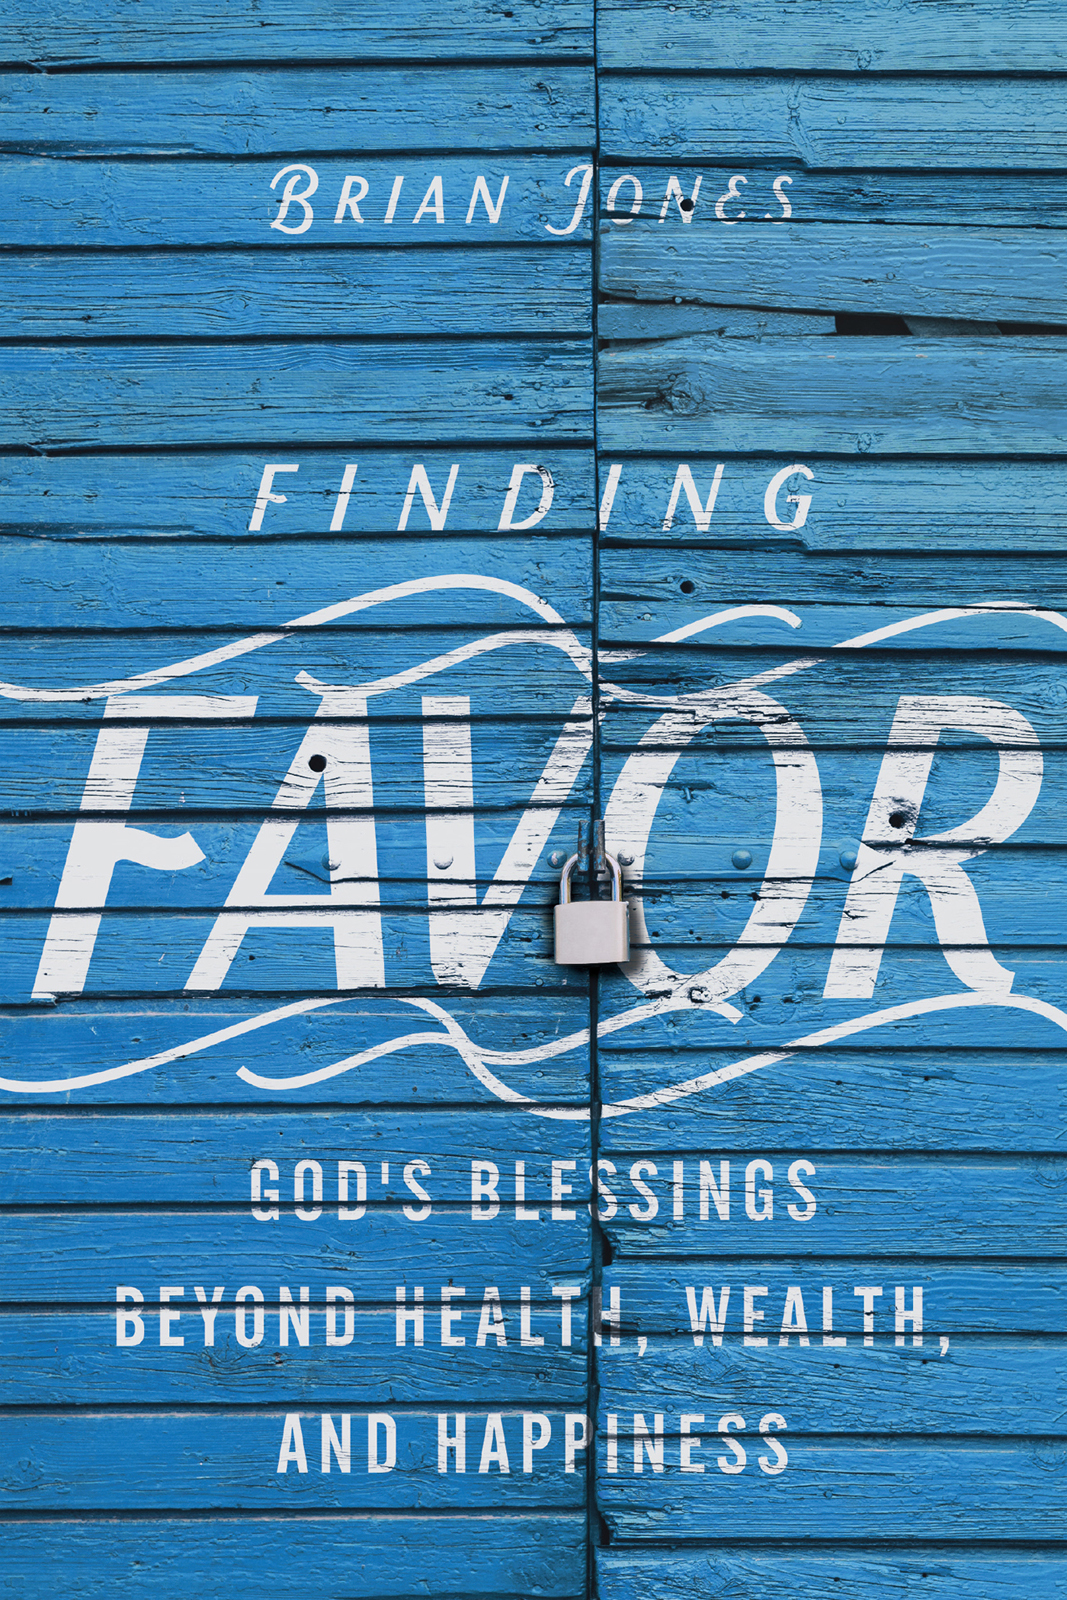 This image is the cover for the book Finding Favor